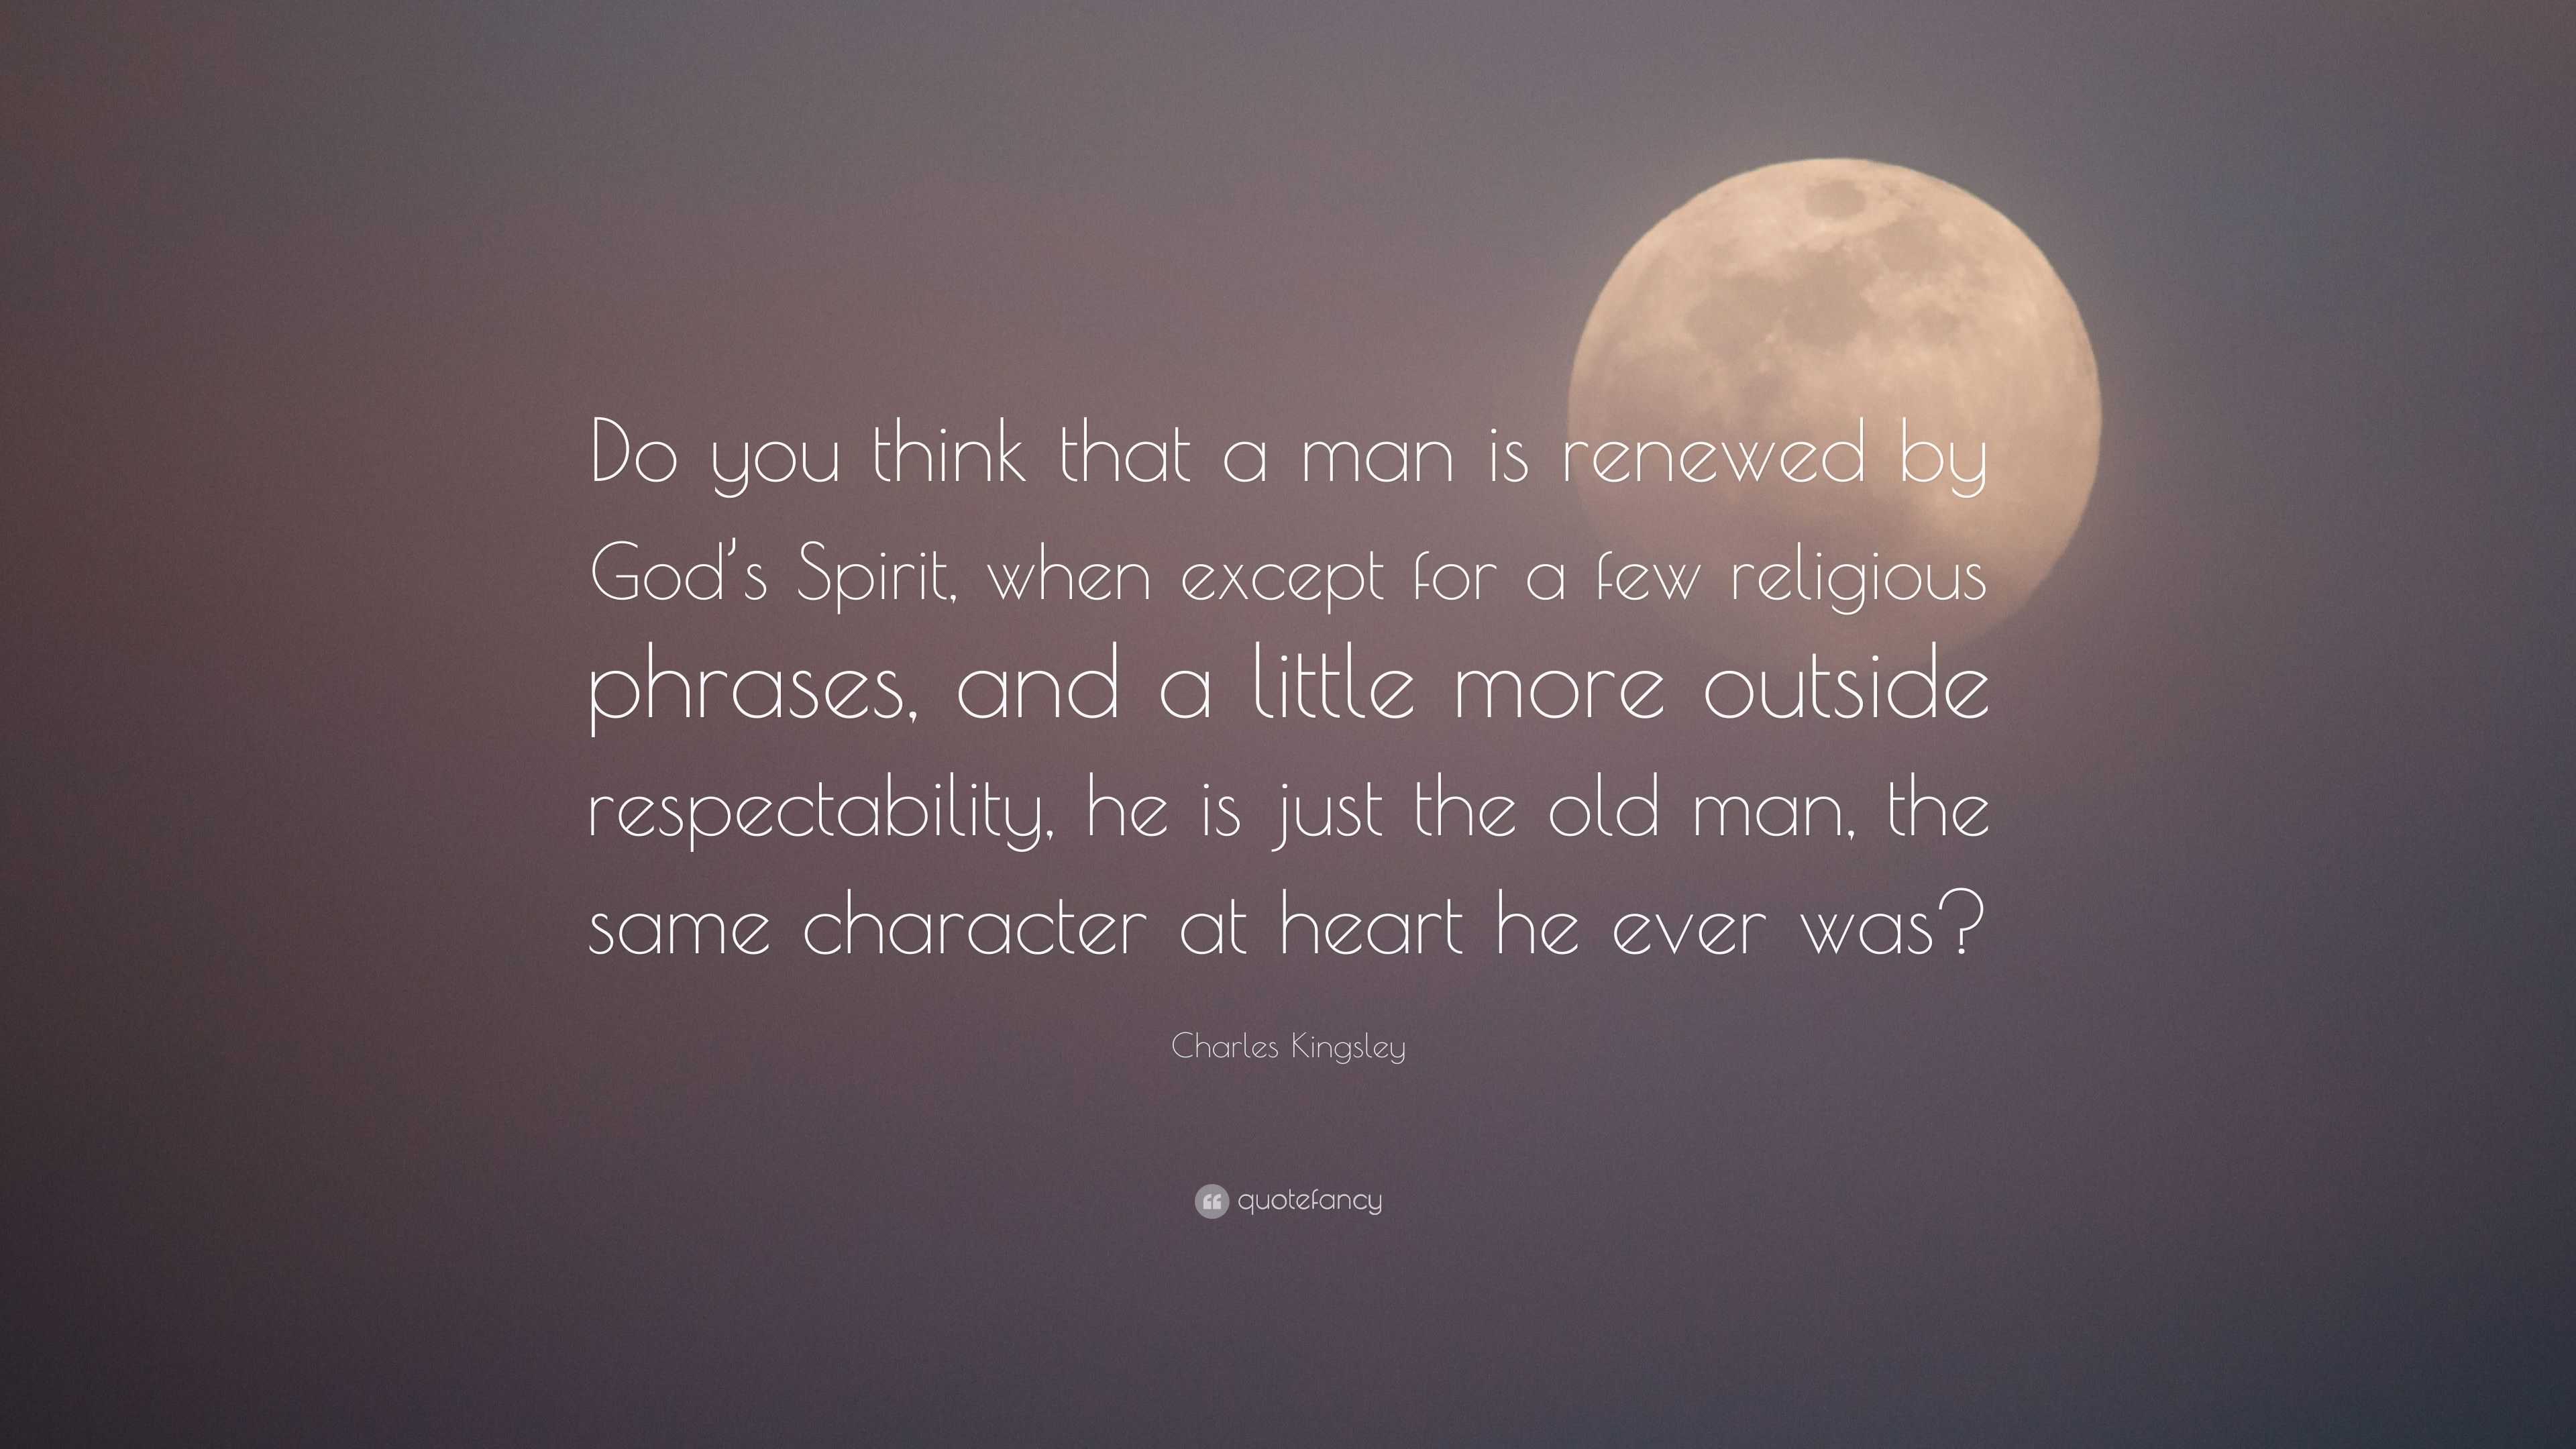 Charles Kingsley Quote: “Do you think that a man is renewed by God’s ...